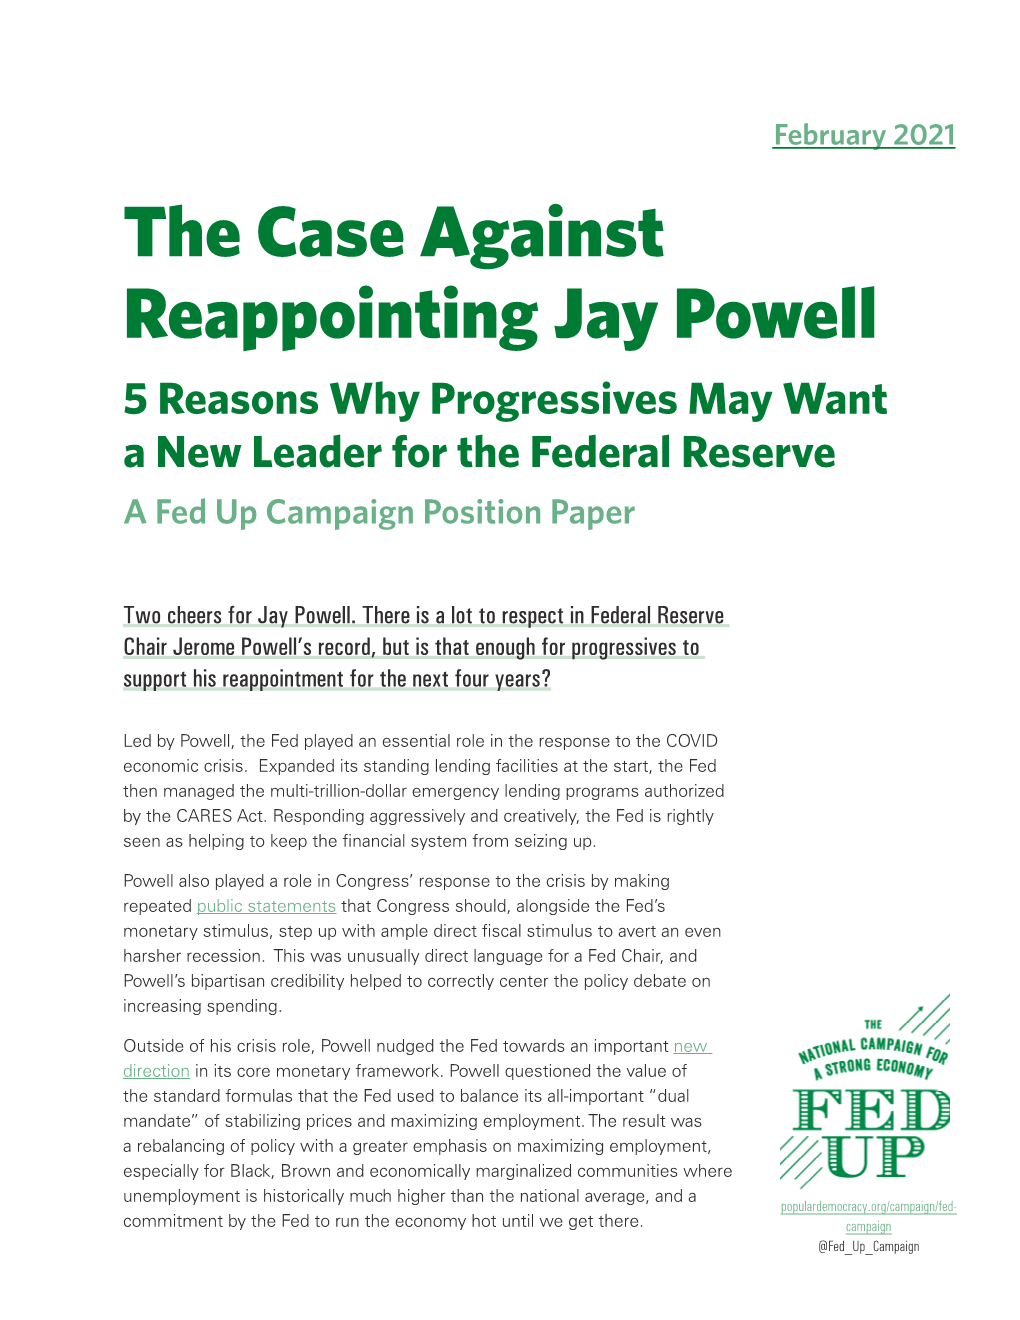 The Case Against Reappointing Jay Powell 5 Reasons Why Progressives May Want a New Leader for the Federal Reserve a Fed up Campaign Position Paper